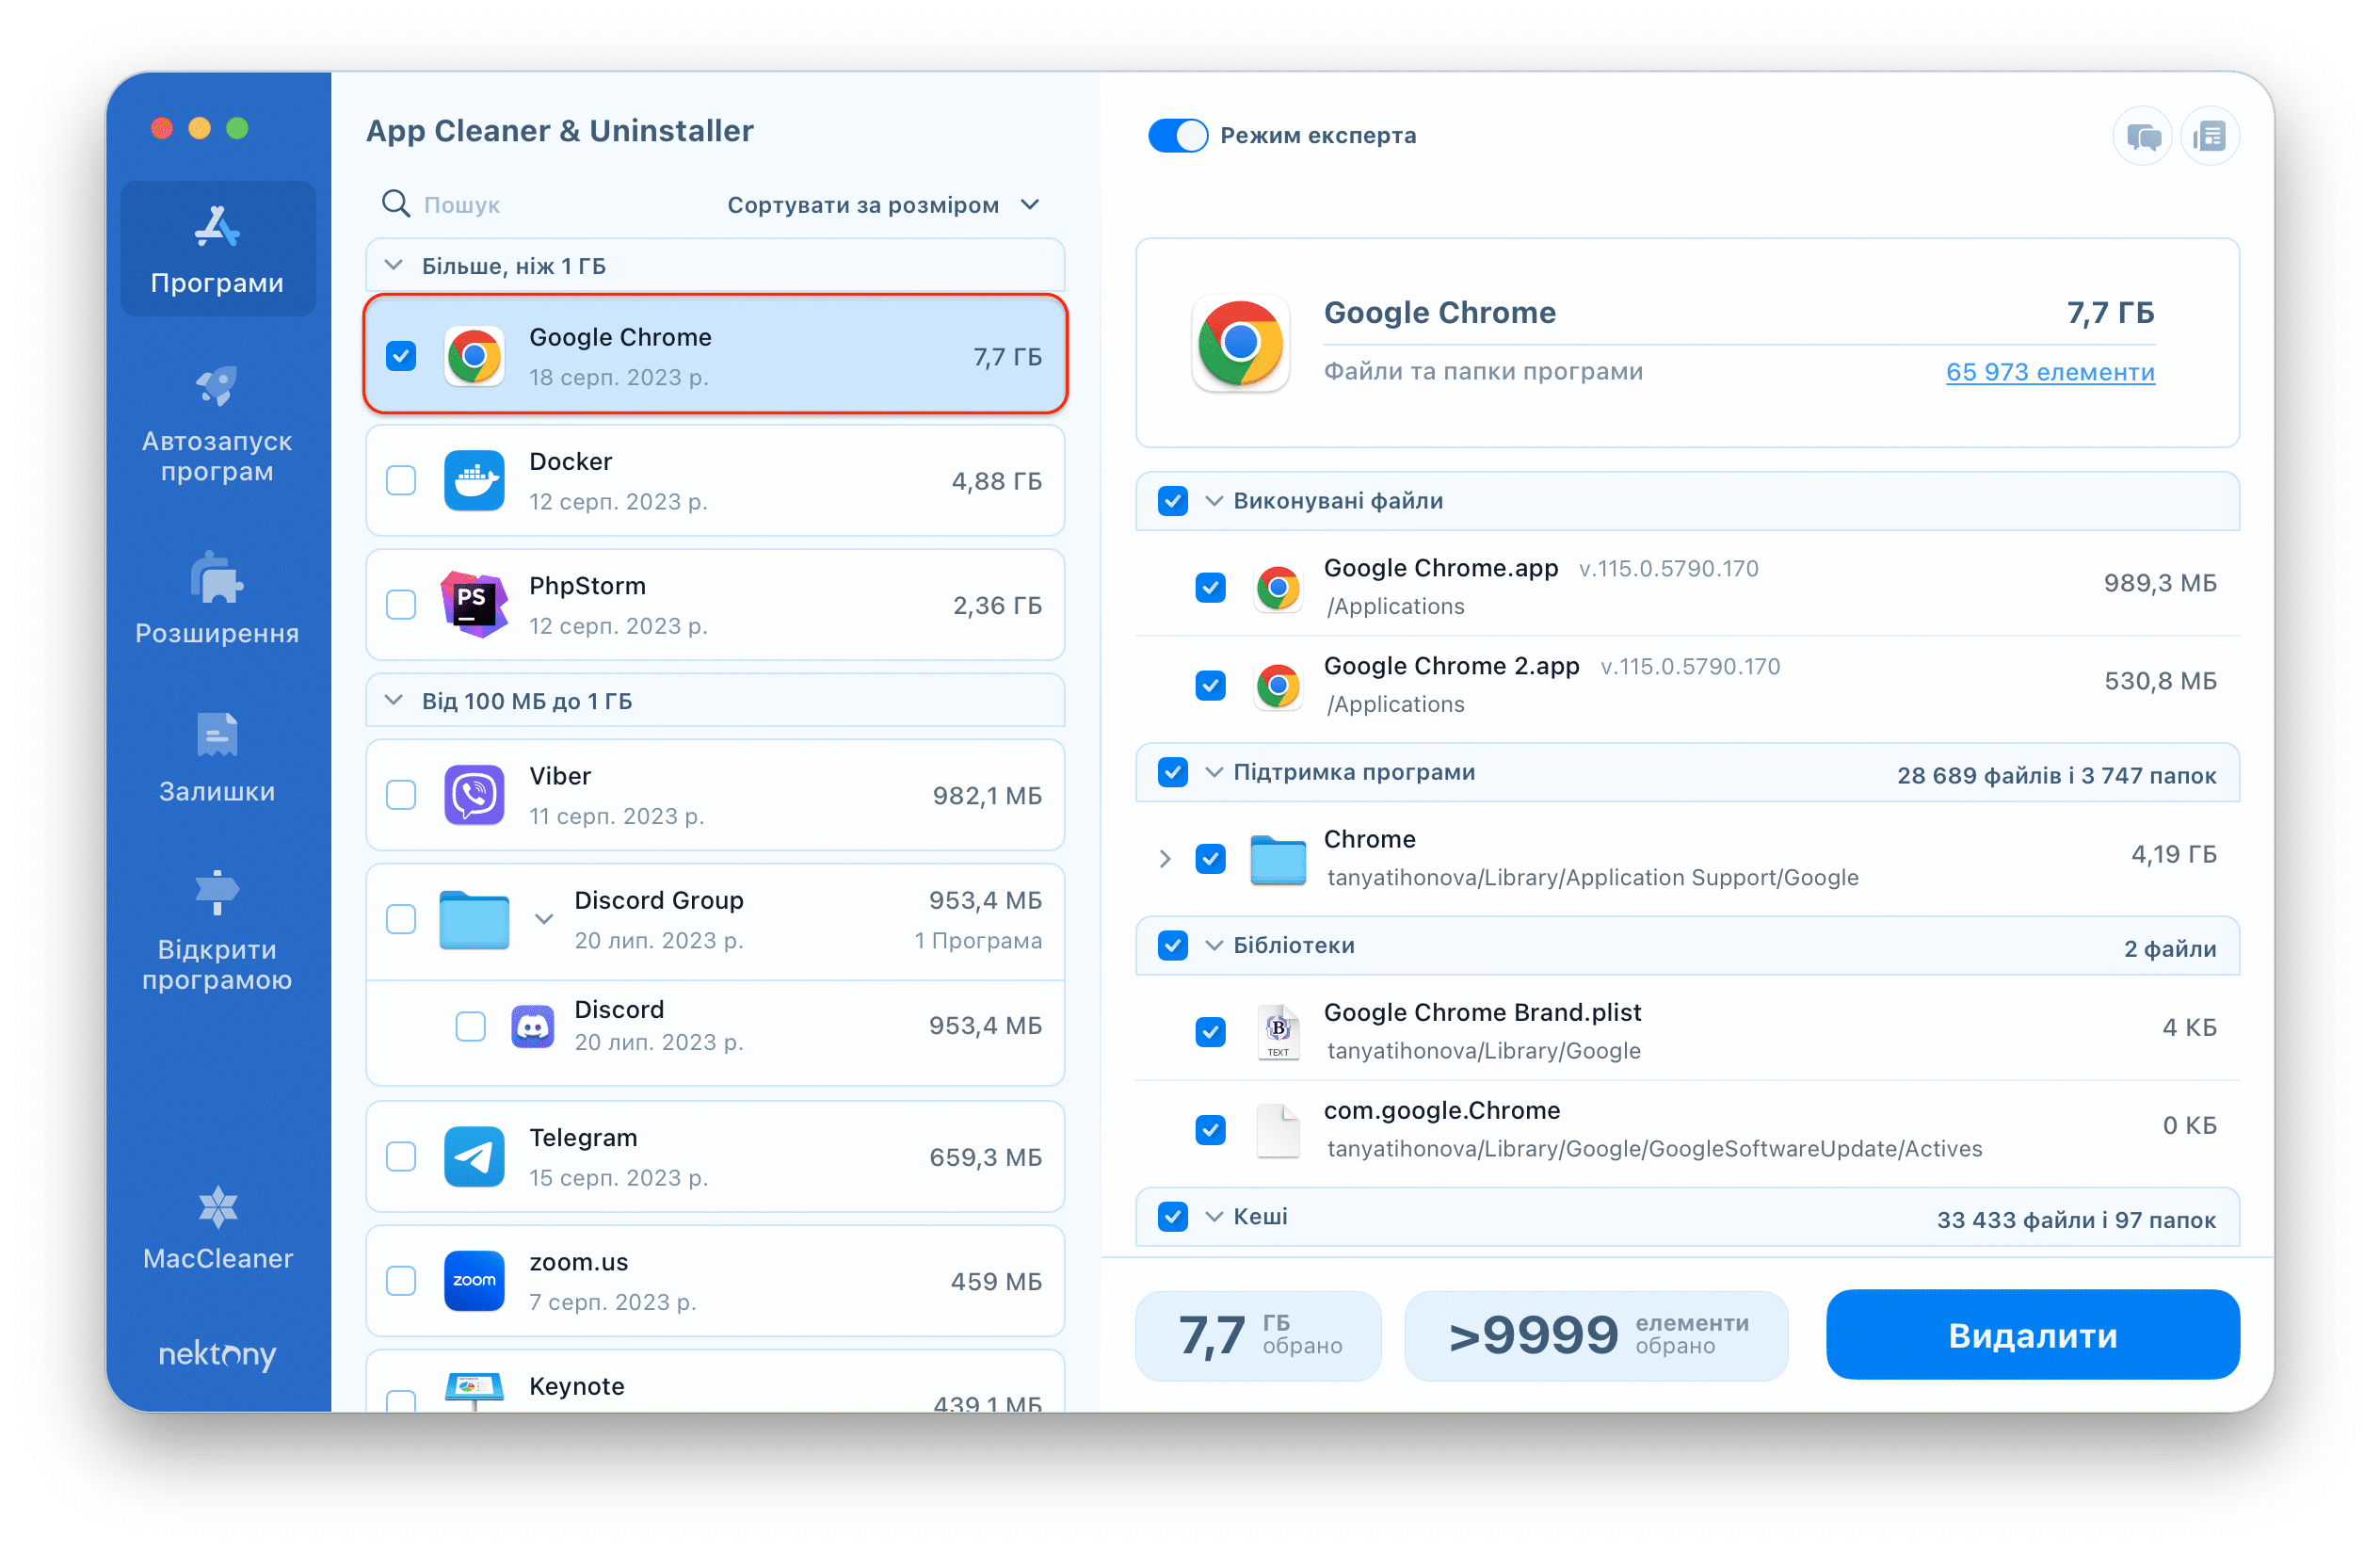 App Cleaner Uninstaller window with a selected app for removal